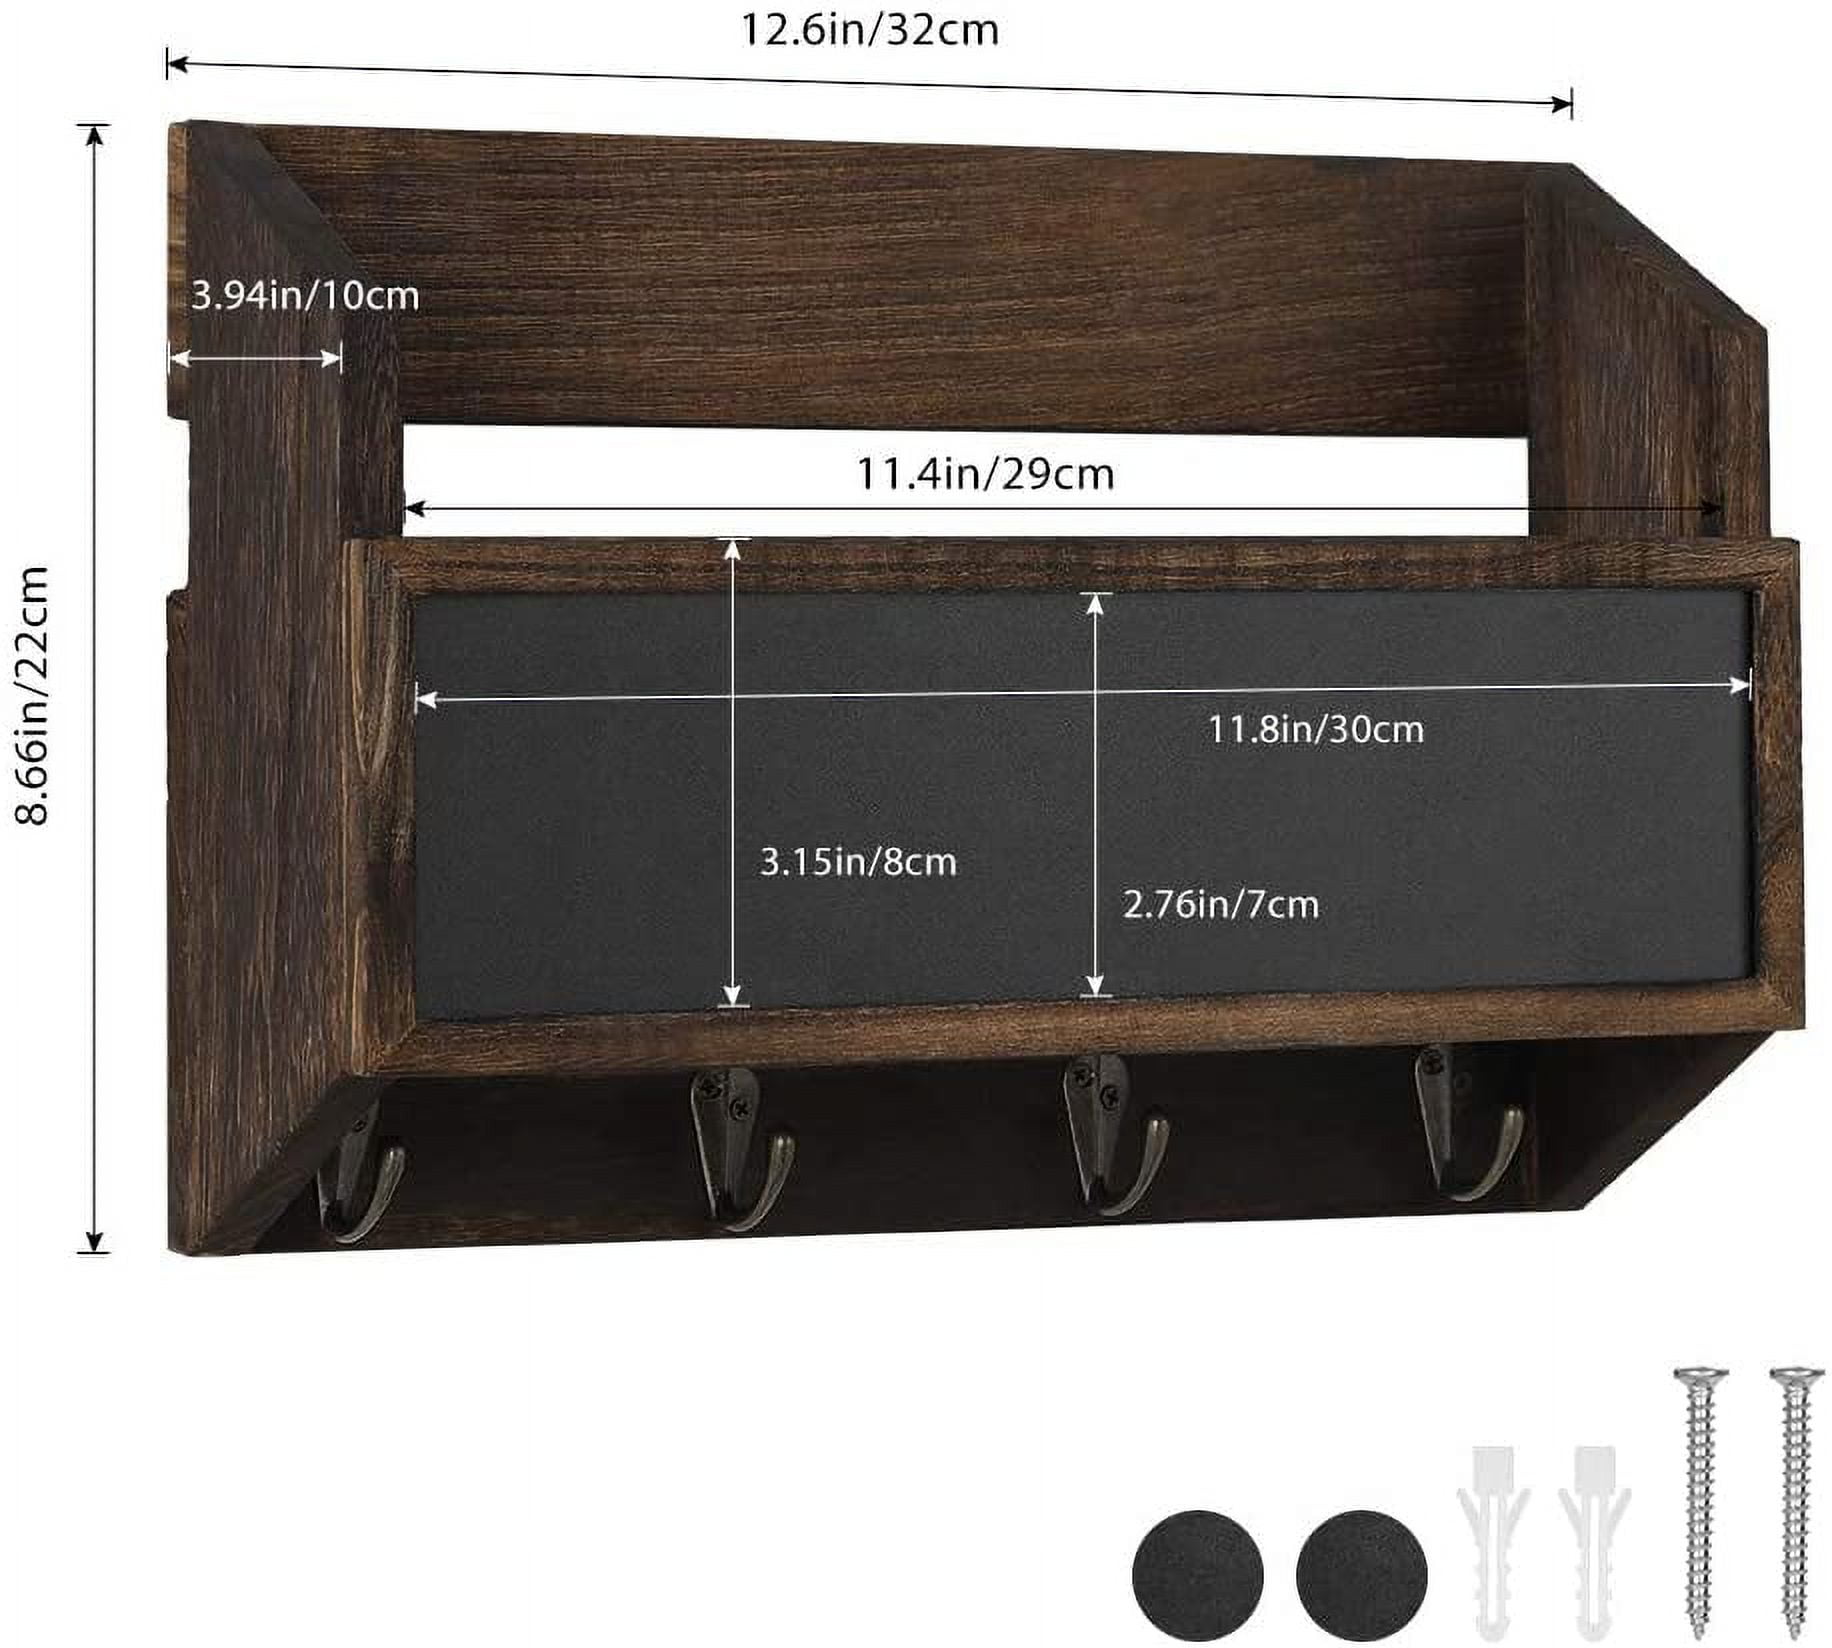 Wall Shelf Organizer with Hooks and Mail Slot - Back2School 2015